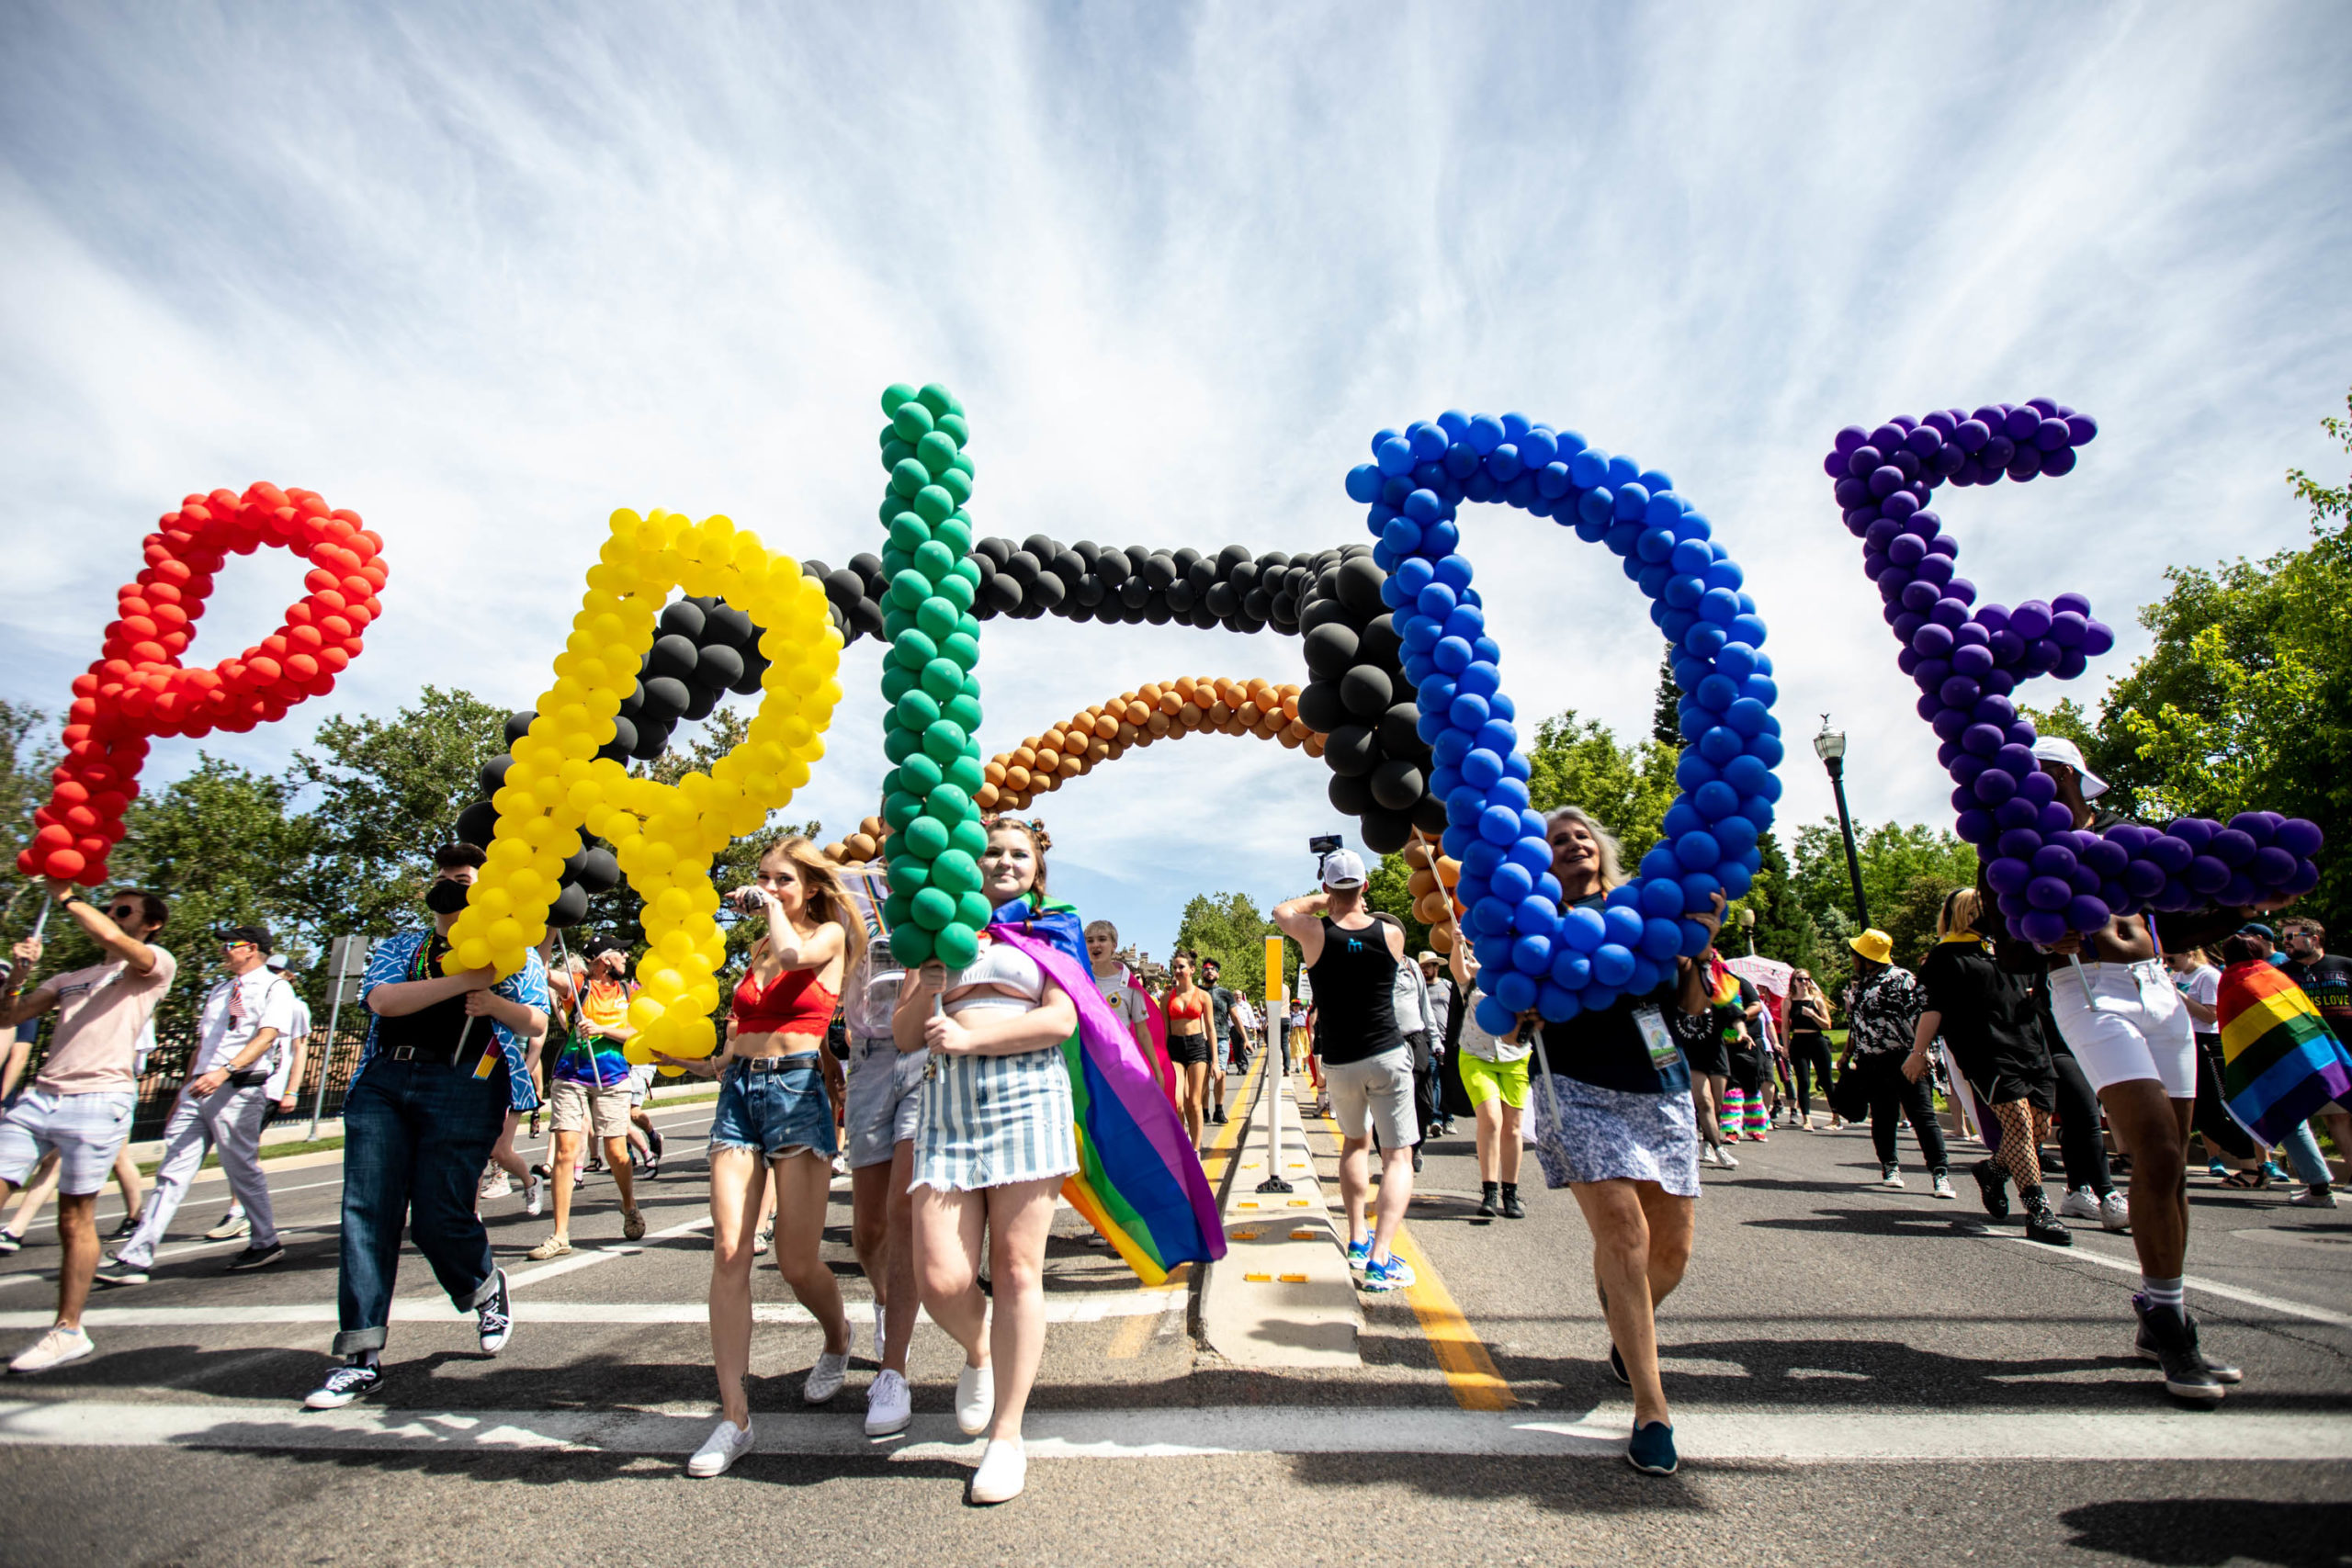 ‘Celebrating the beautiful spectrum of your souls’ Hundreds march for pride in Salt Lake City